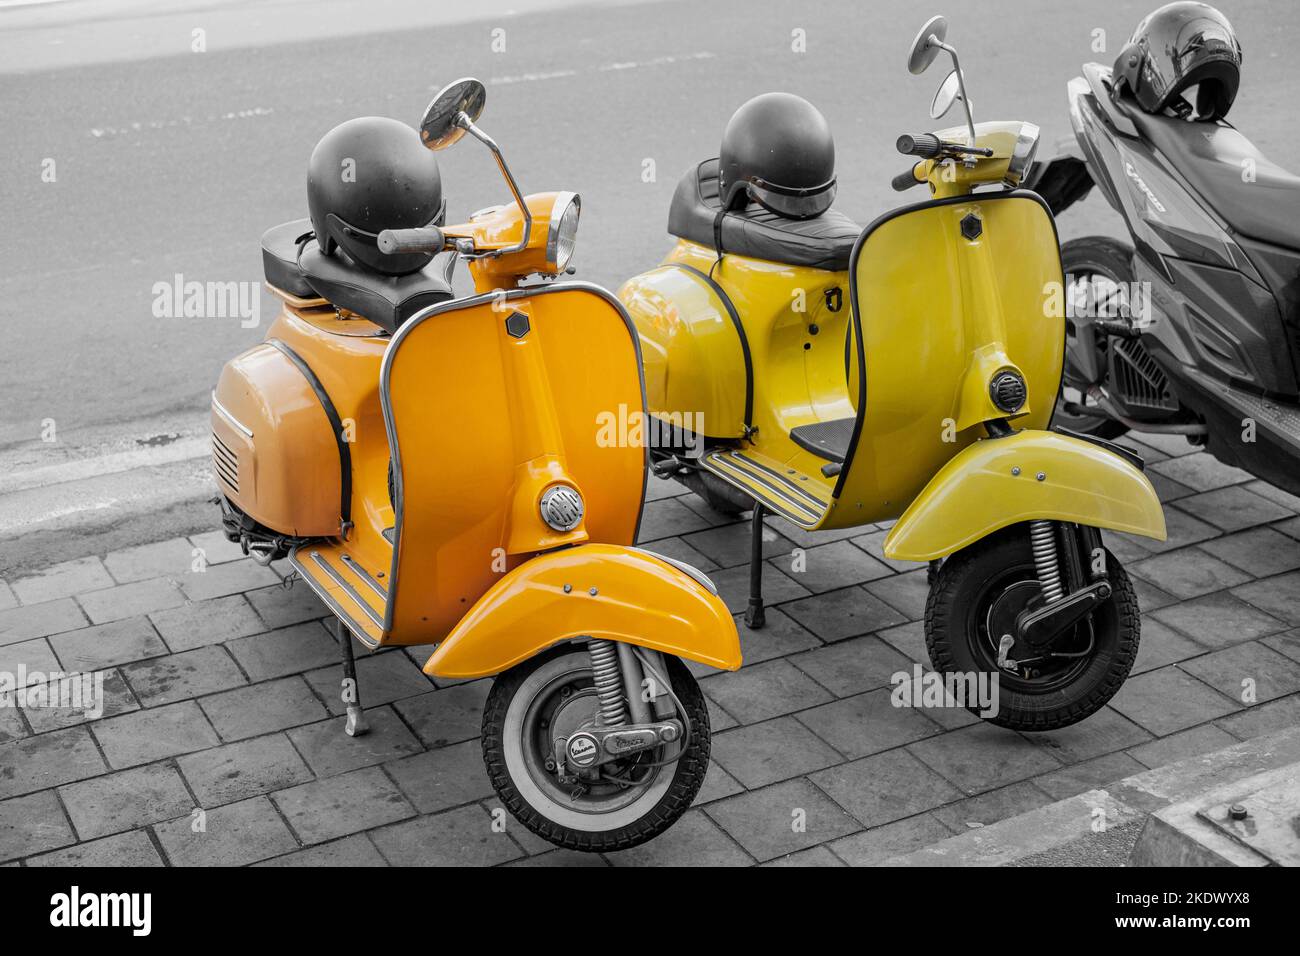 Yellow and orange vintage scooter motorcycle while the other objects are monochrome or black and white or desaturated Stock Photo